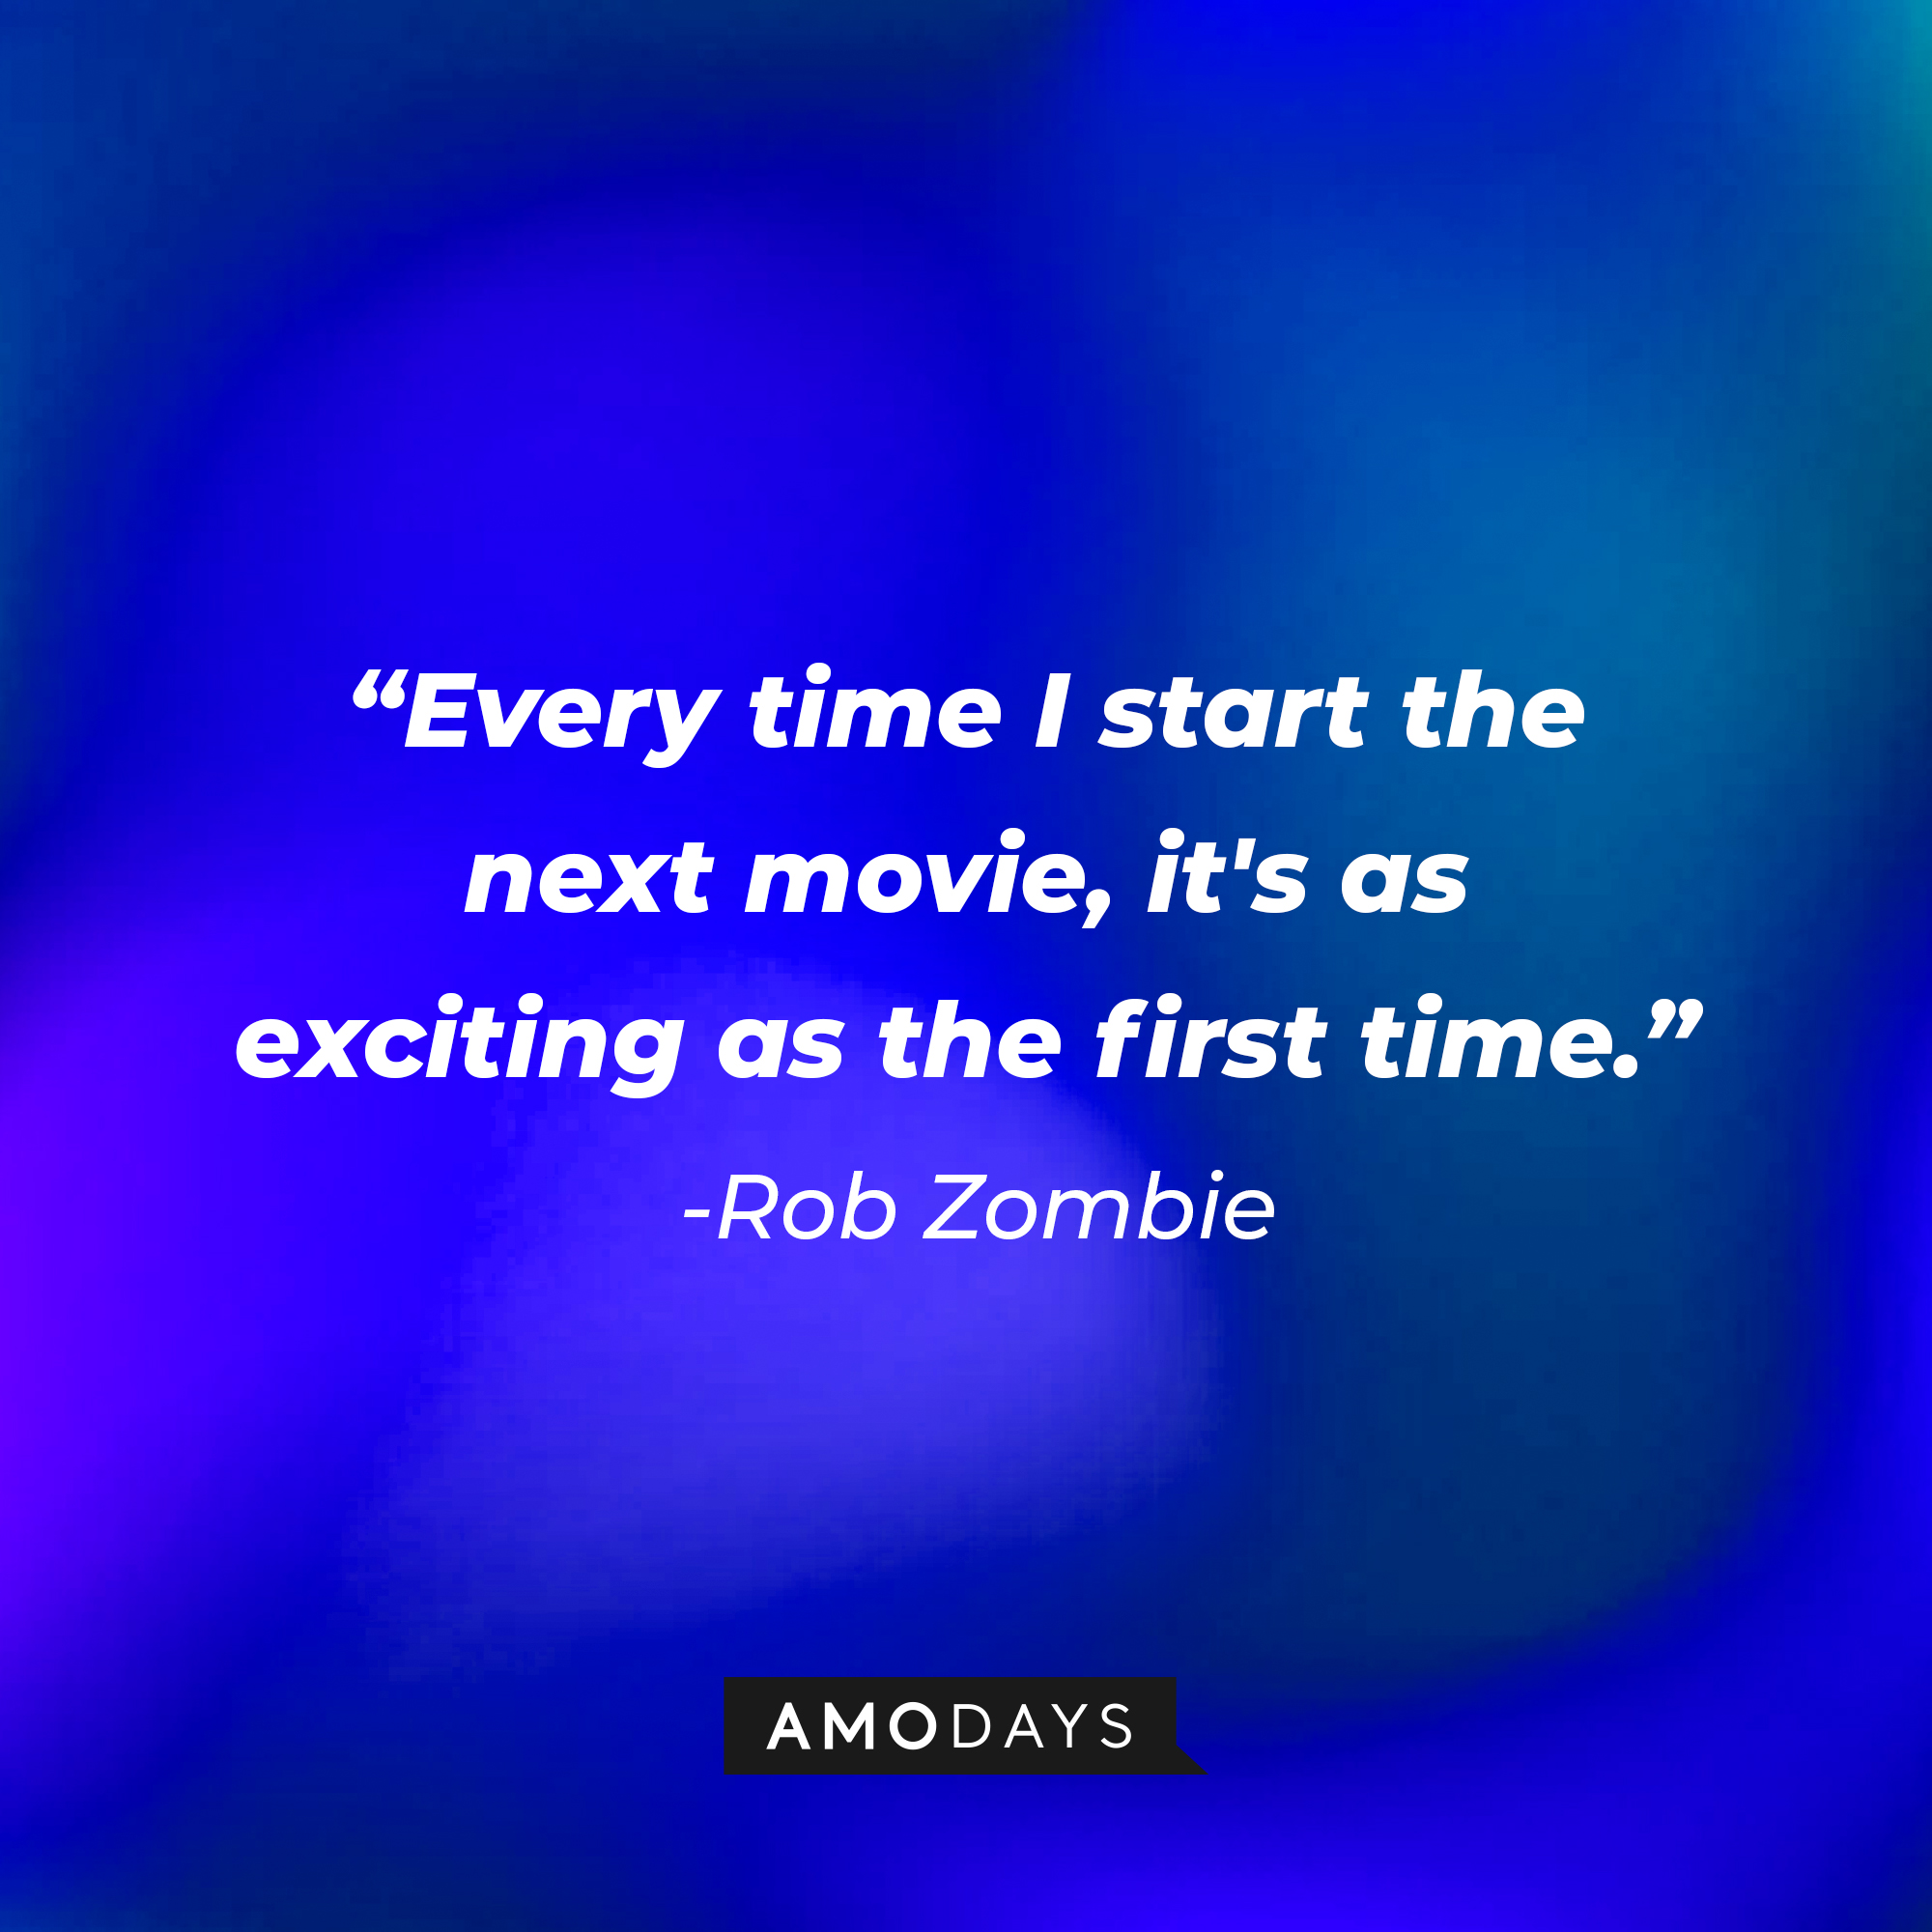 Rob Zombie's quote "Every time I start the next movie, it's as exciting as the first time." | Source: AmoDays